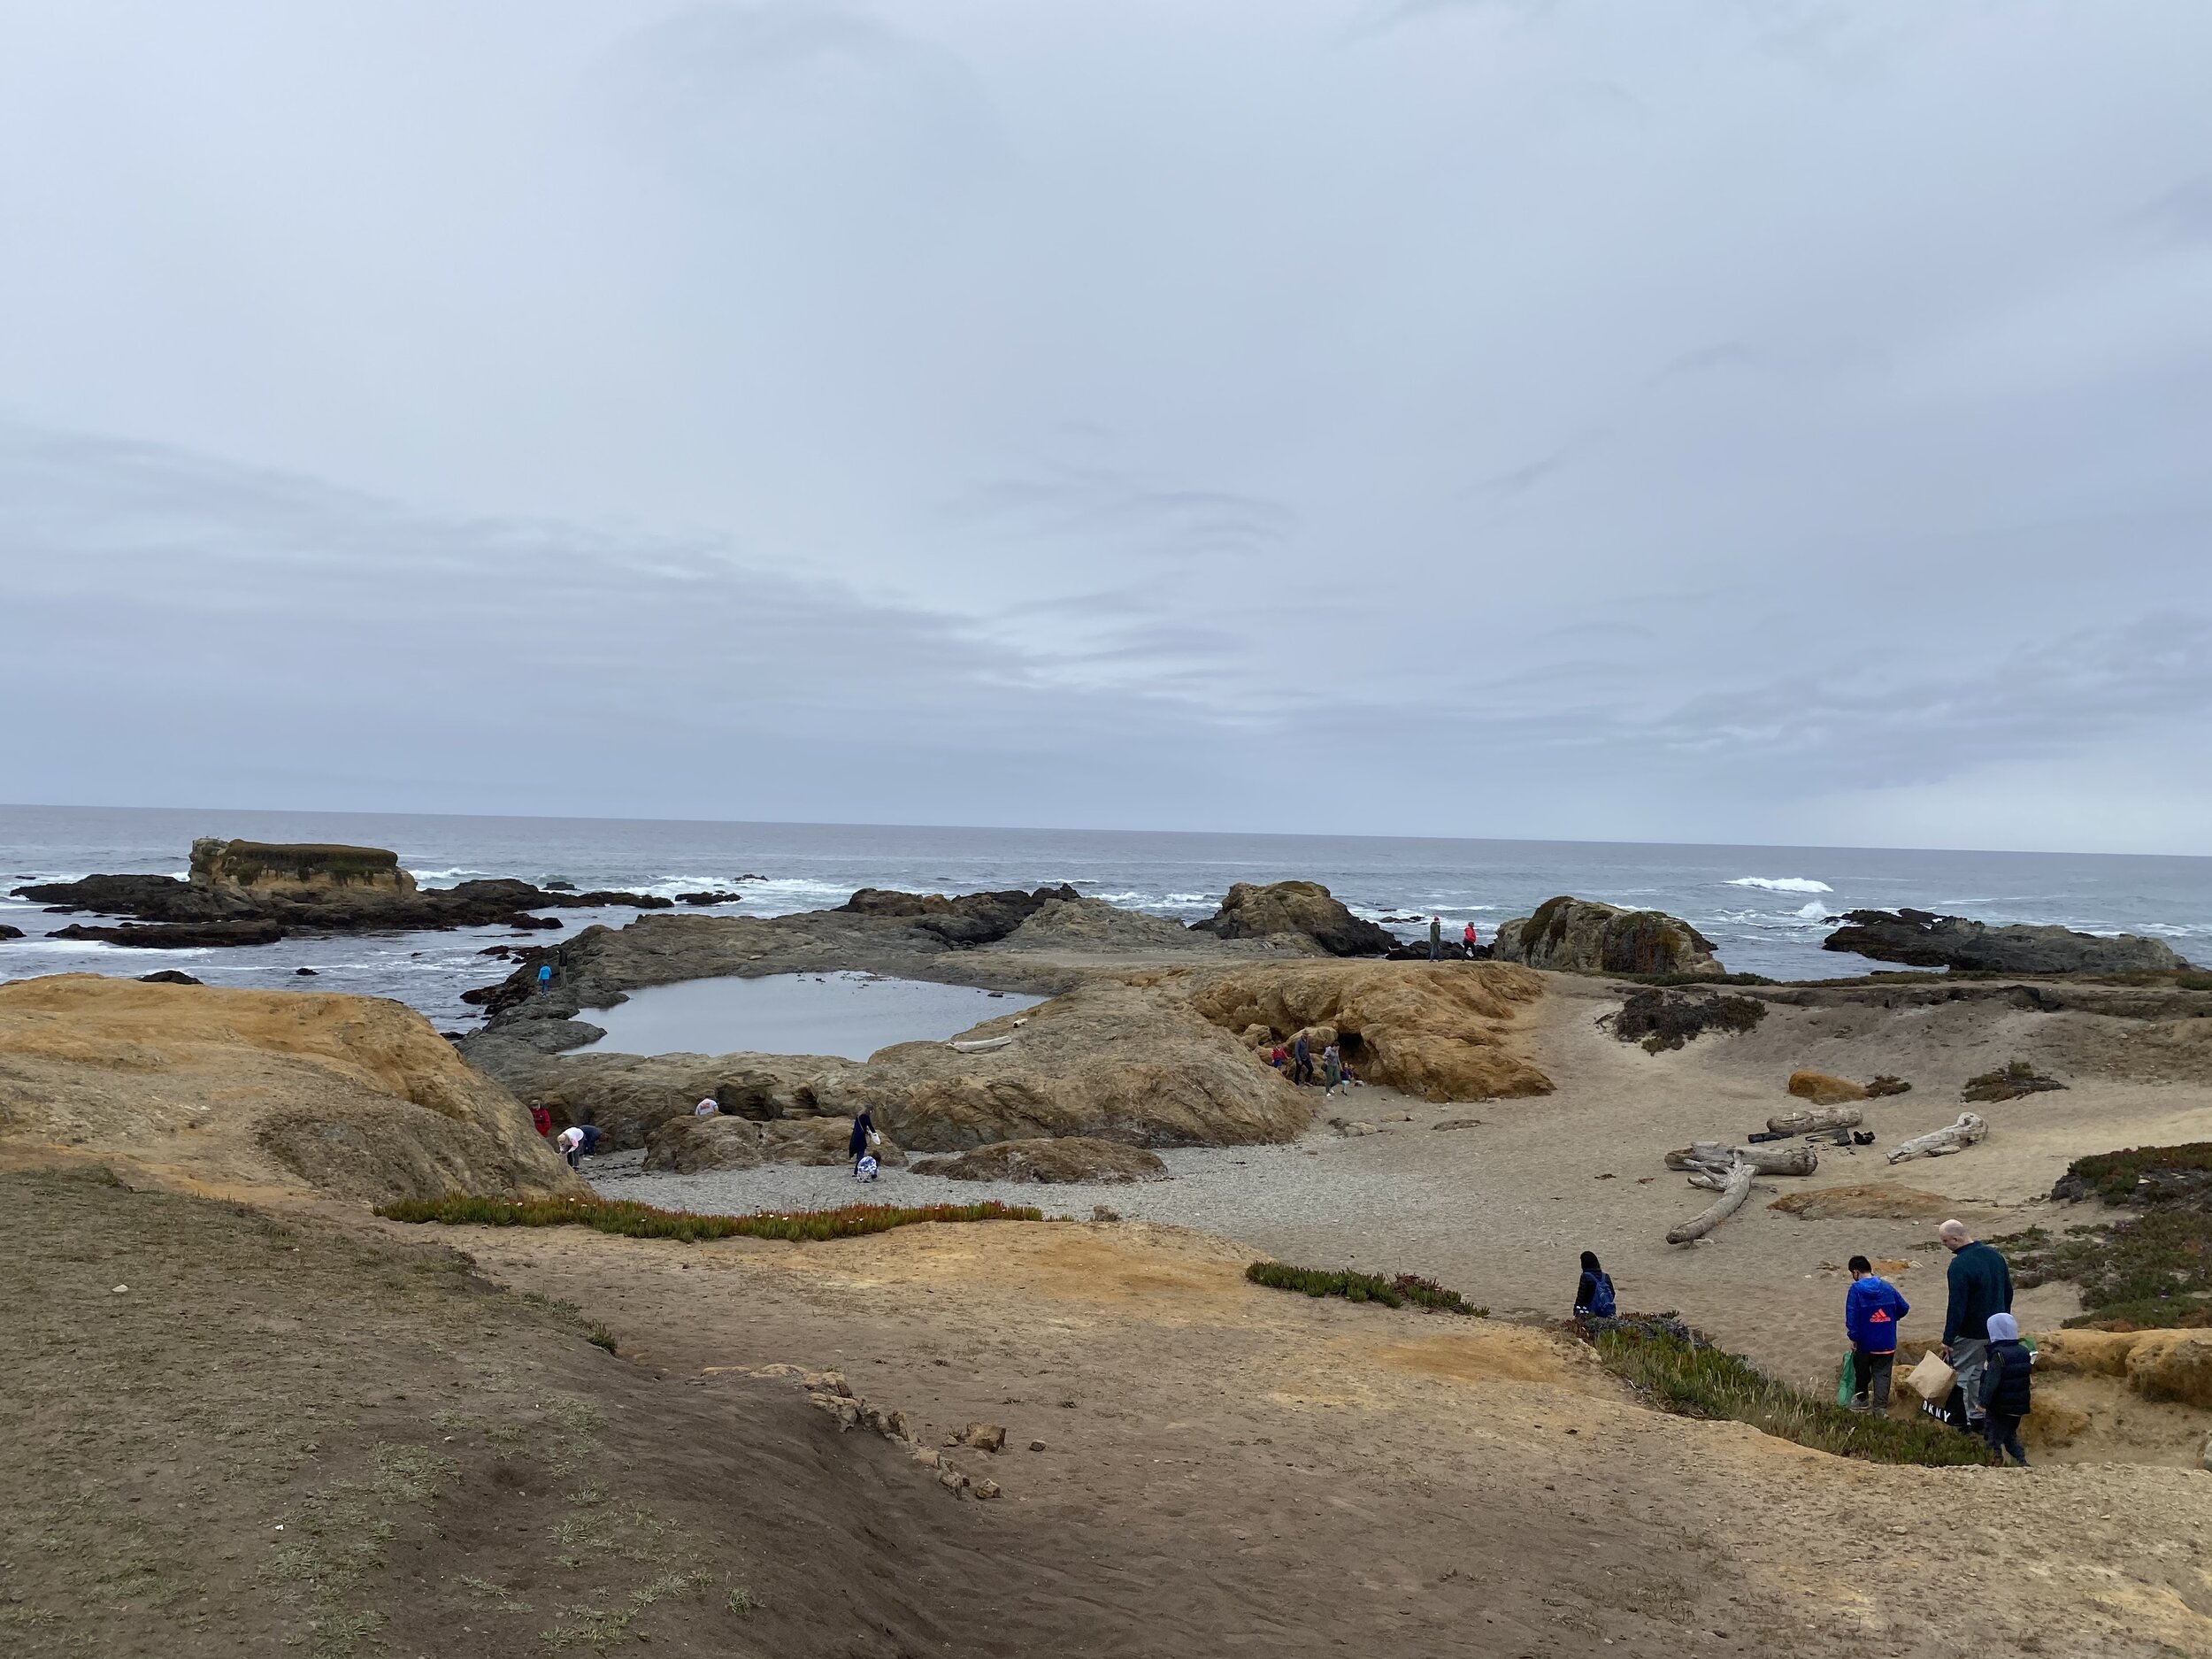 A broader view of Glass Beach